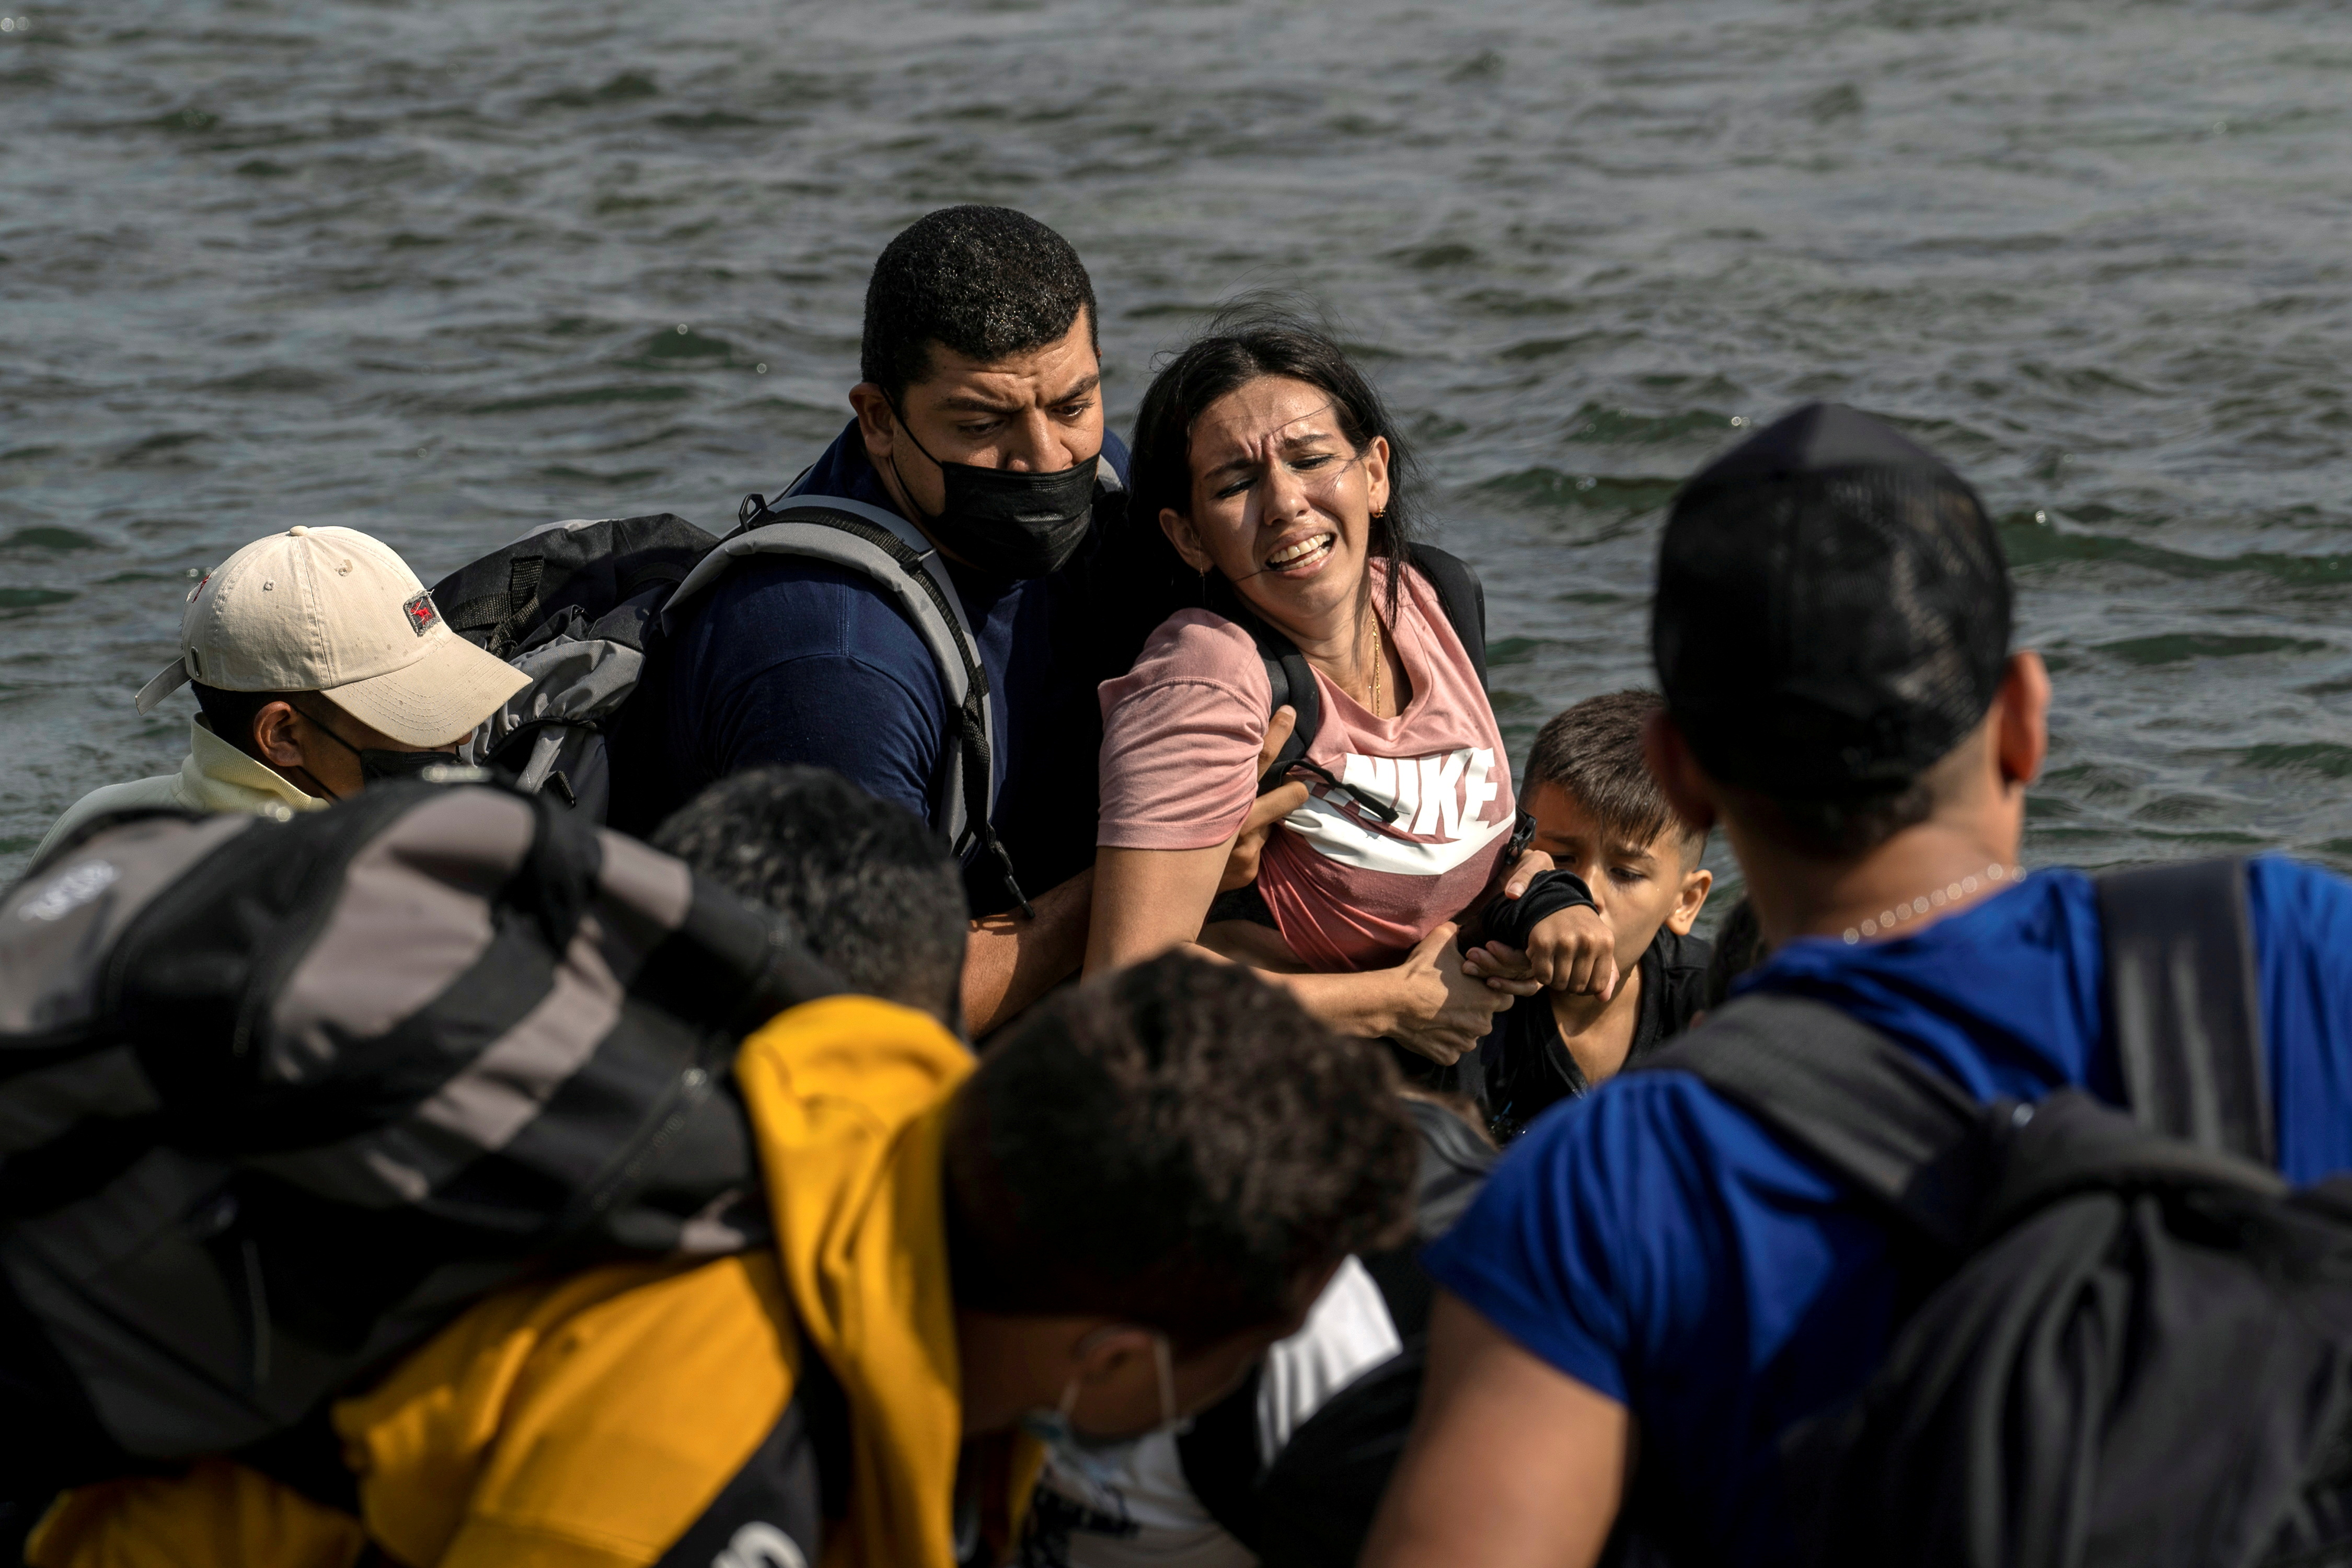 An asylum-seeking migrant woman from Venezuela reacts as she walks in the water to cross the Rio Grande river into the United States from Mexico in Del Rio, Texas, U.S., May 26, 2021. REUTERS/Go Nakamura/File Photo